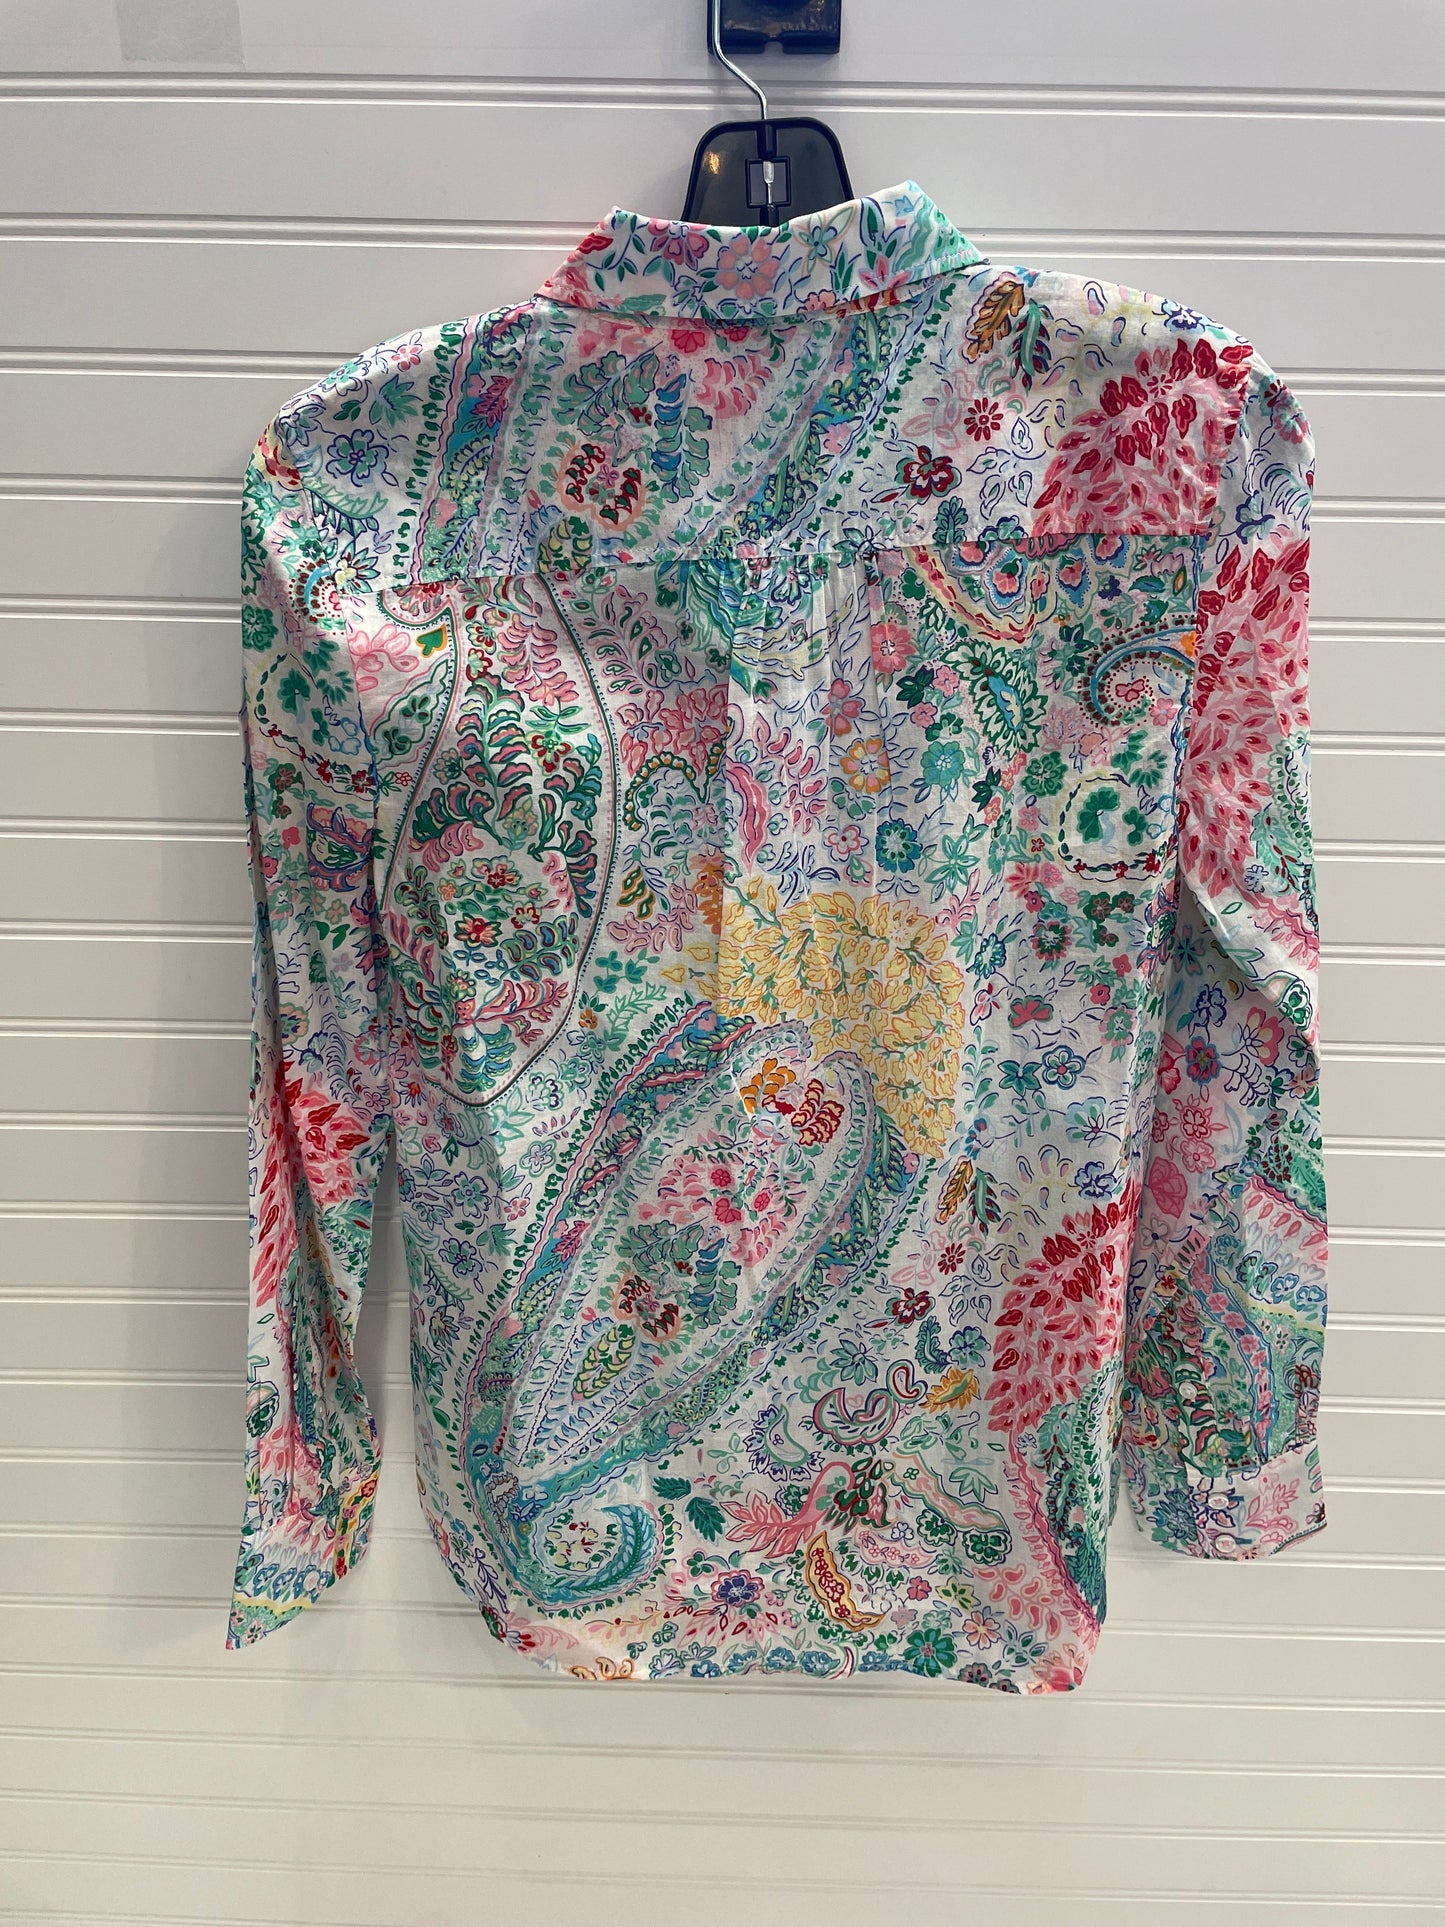 Multi-colored Blouse Long Sleeve Talbots, Size Xs